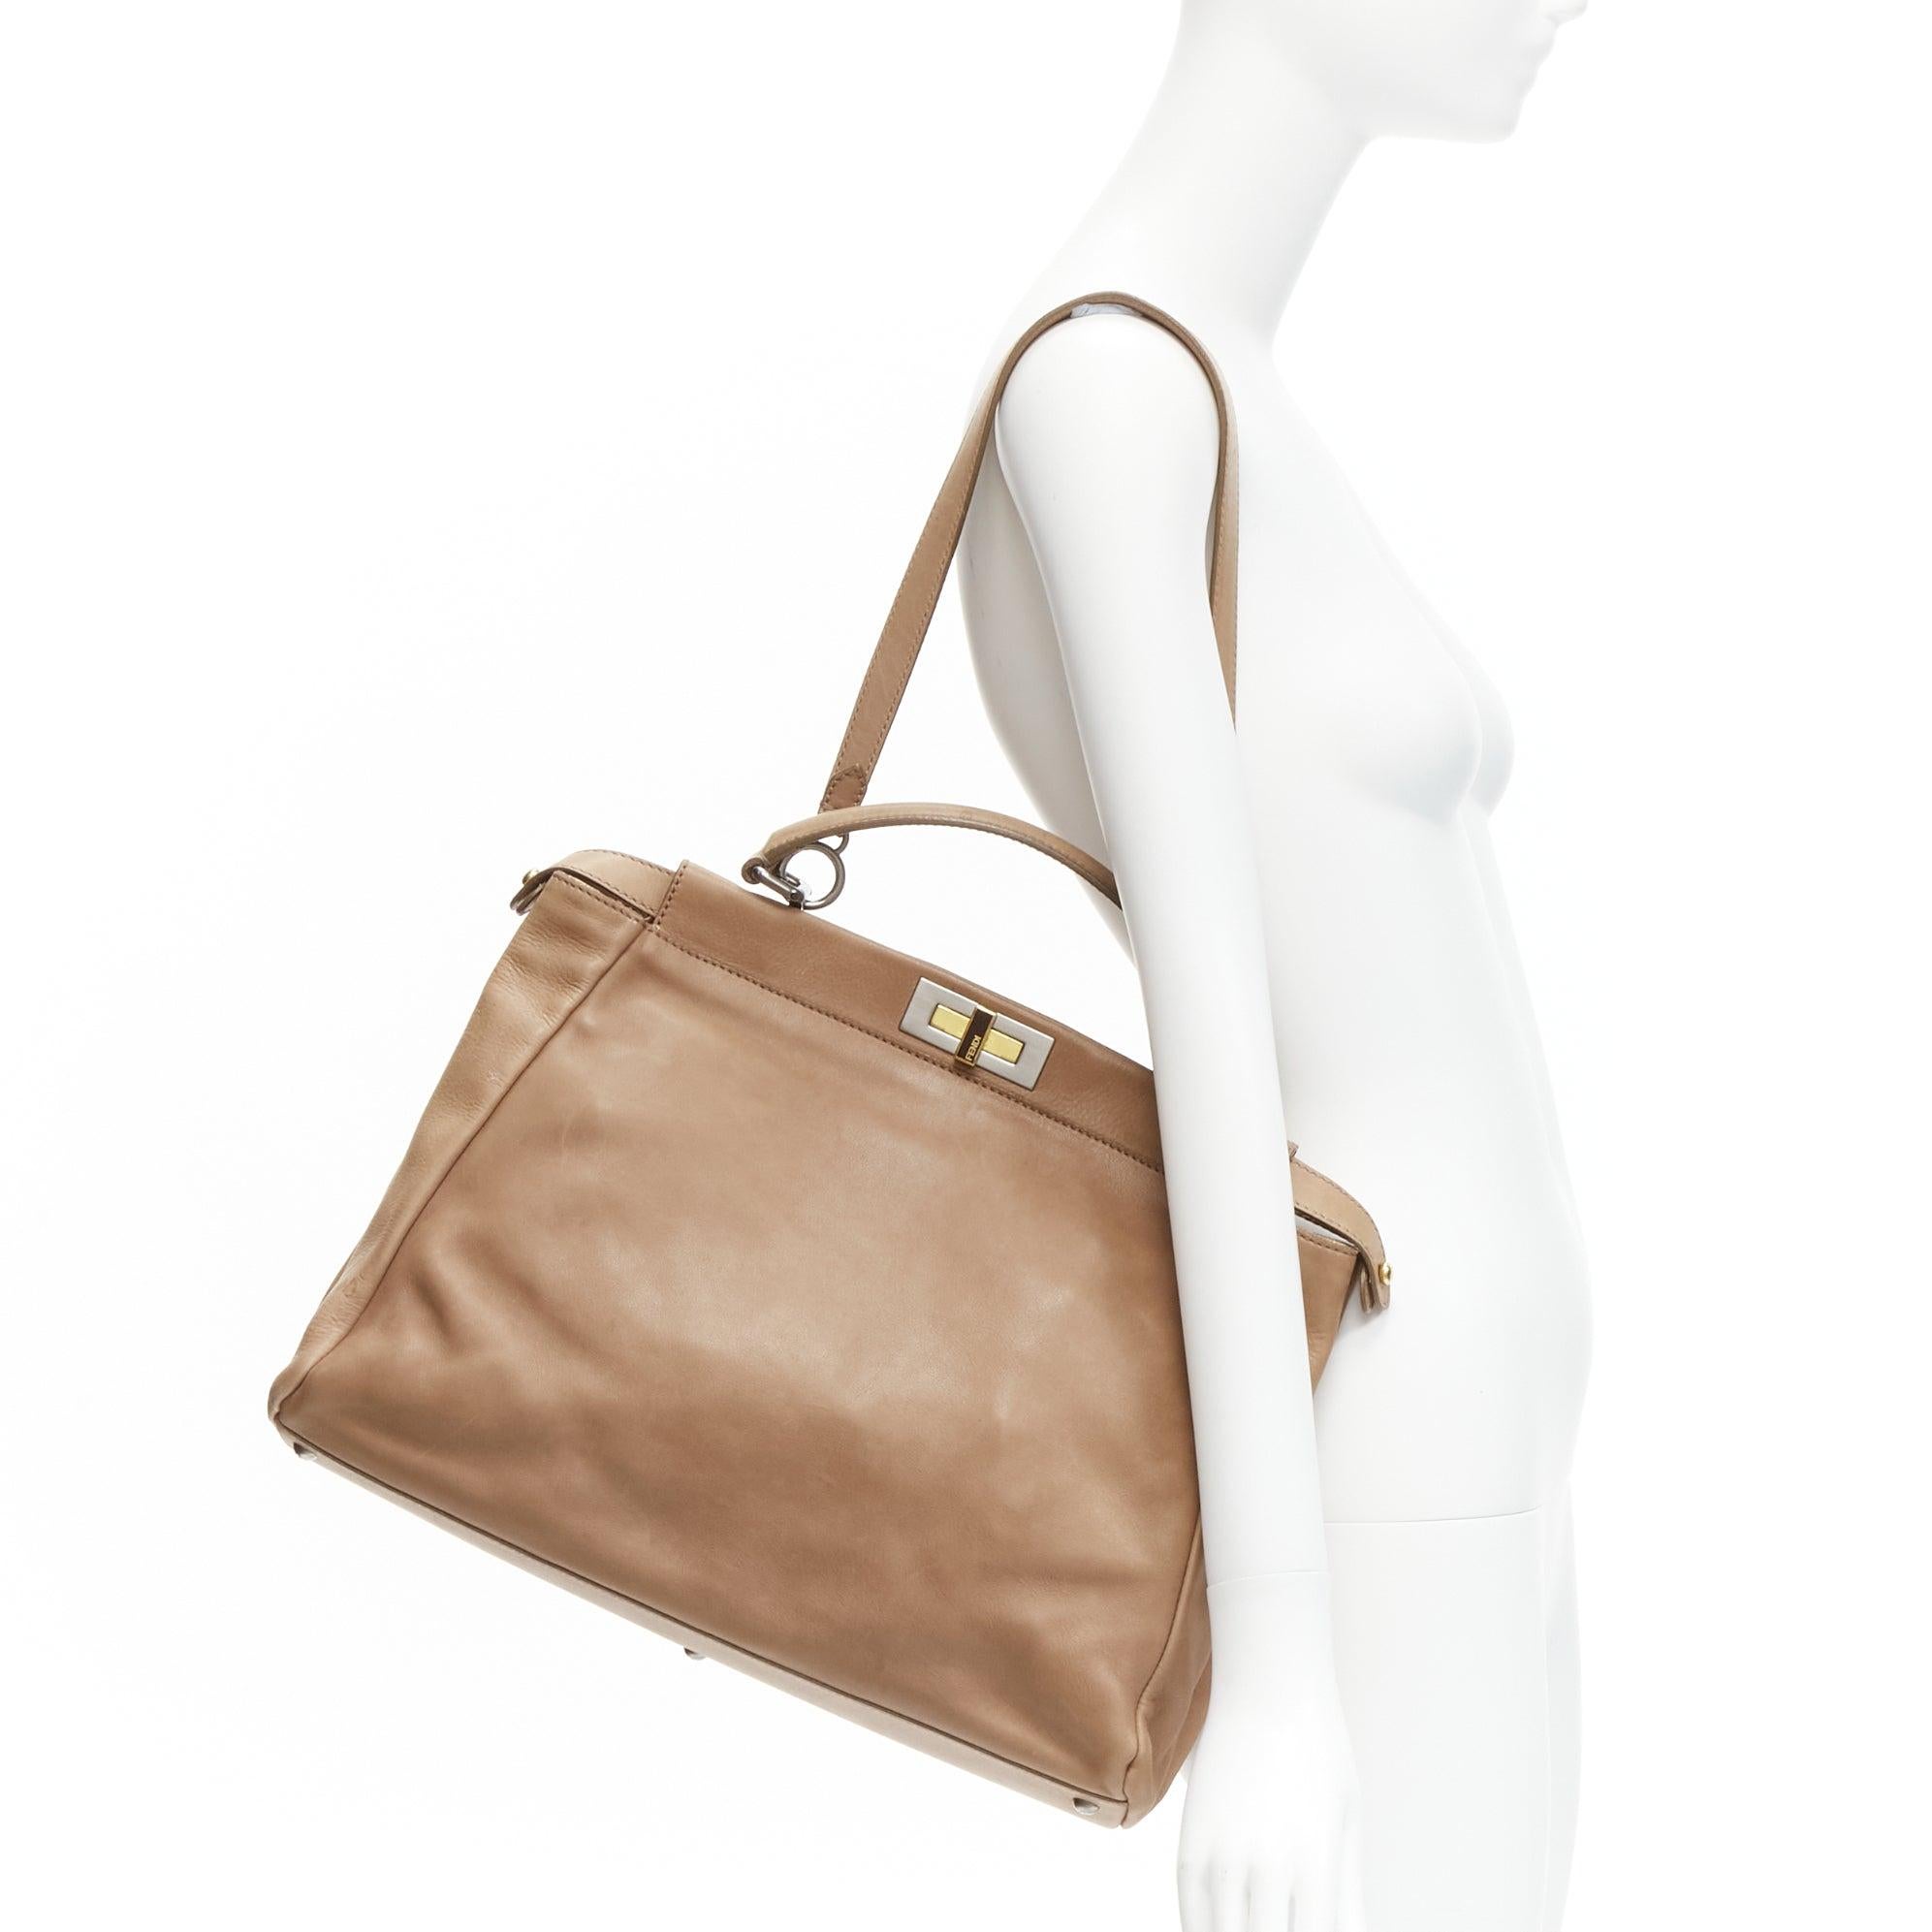 FENDI Peekaboo brown soft leather mixed metal turnlock top handle shoulder bag
Reference: GIYG/A00309
Brand: Fendi
Model: Peekaboo
Material: Leather
Color: Brown
Pattern: Solid
Closure: Turnlock
Lining: Brown Leather
Extra Details: Scaled leather